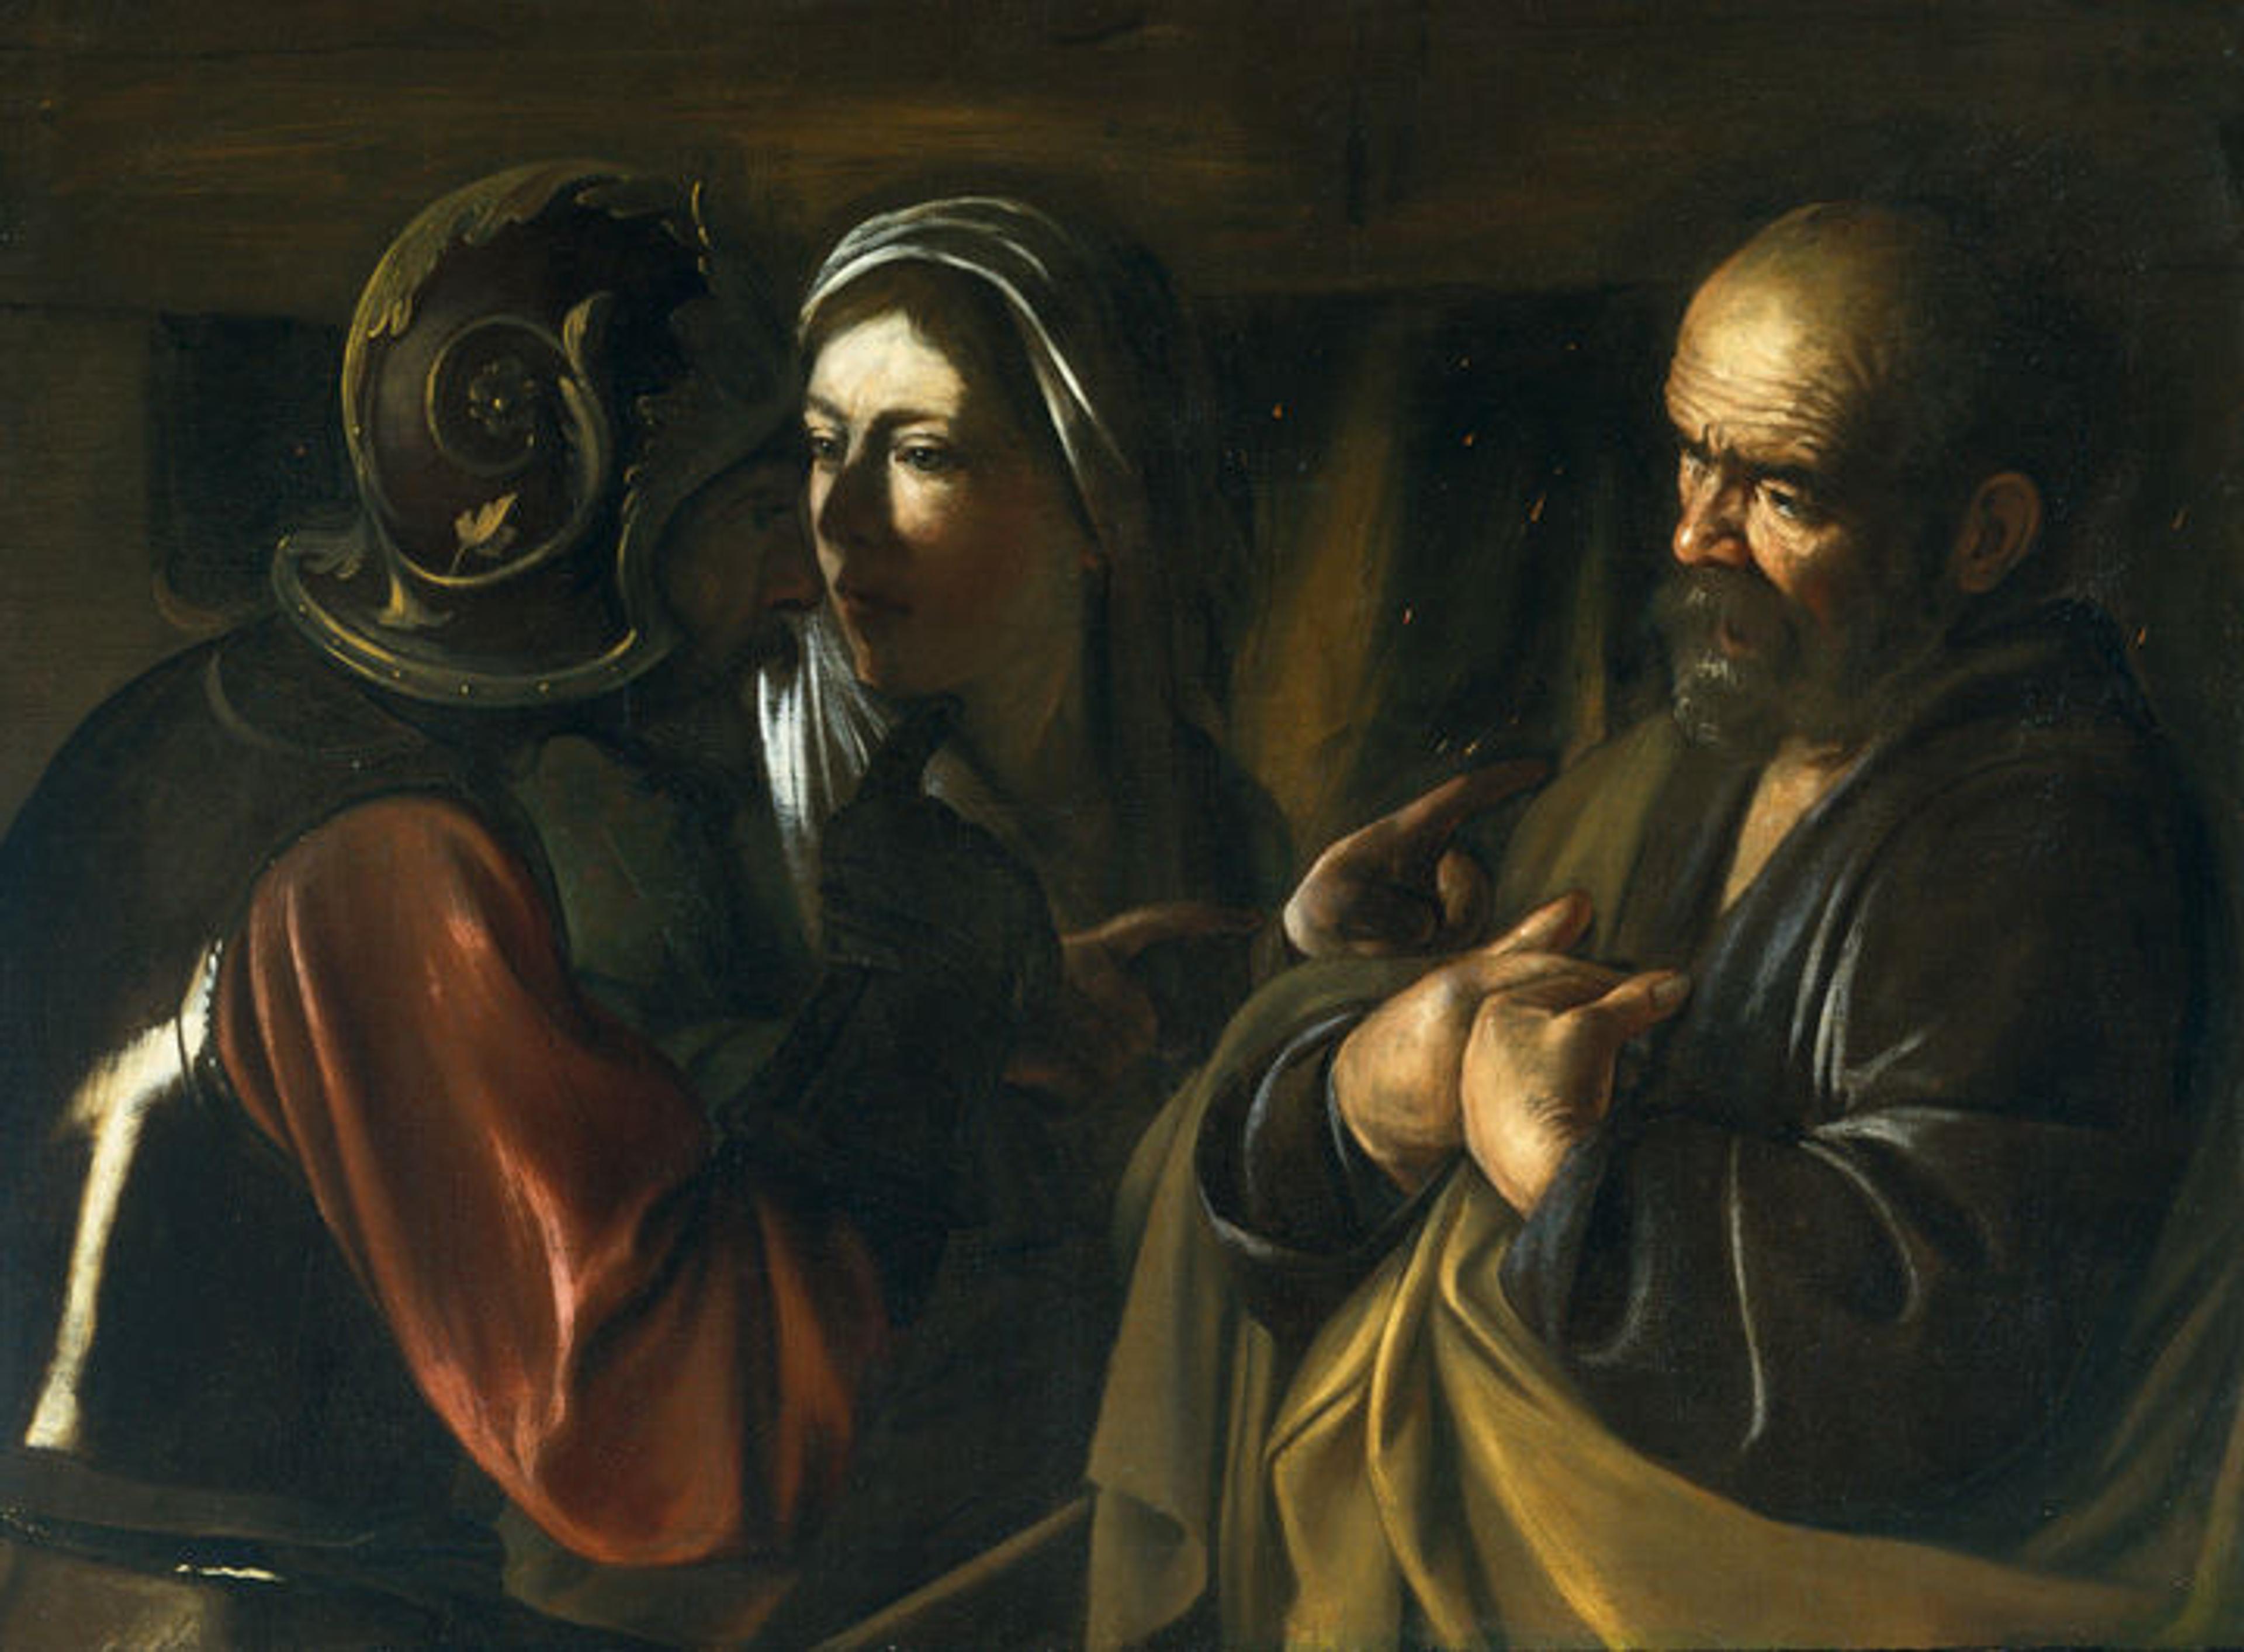 A dark oil painting showing a despondent-looking man and woman talking to a Roman soldier